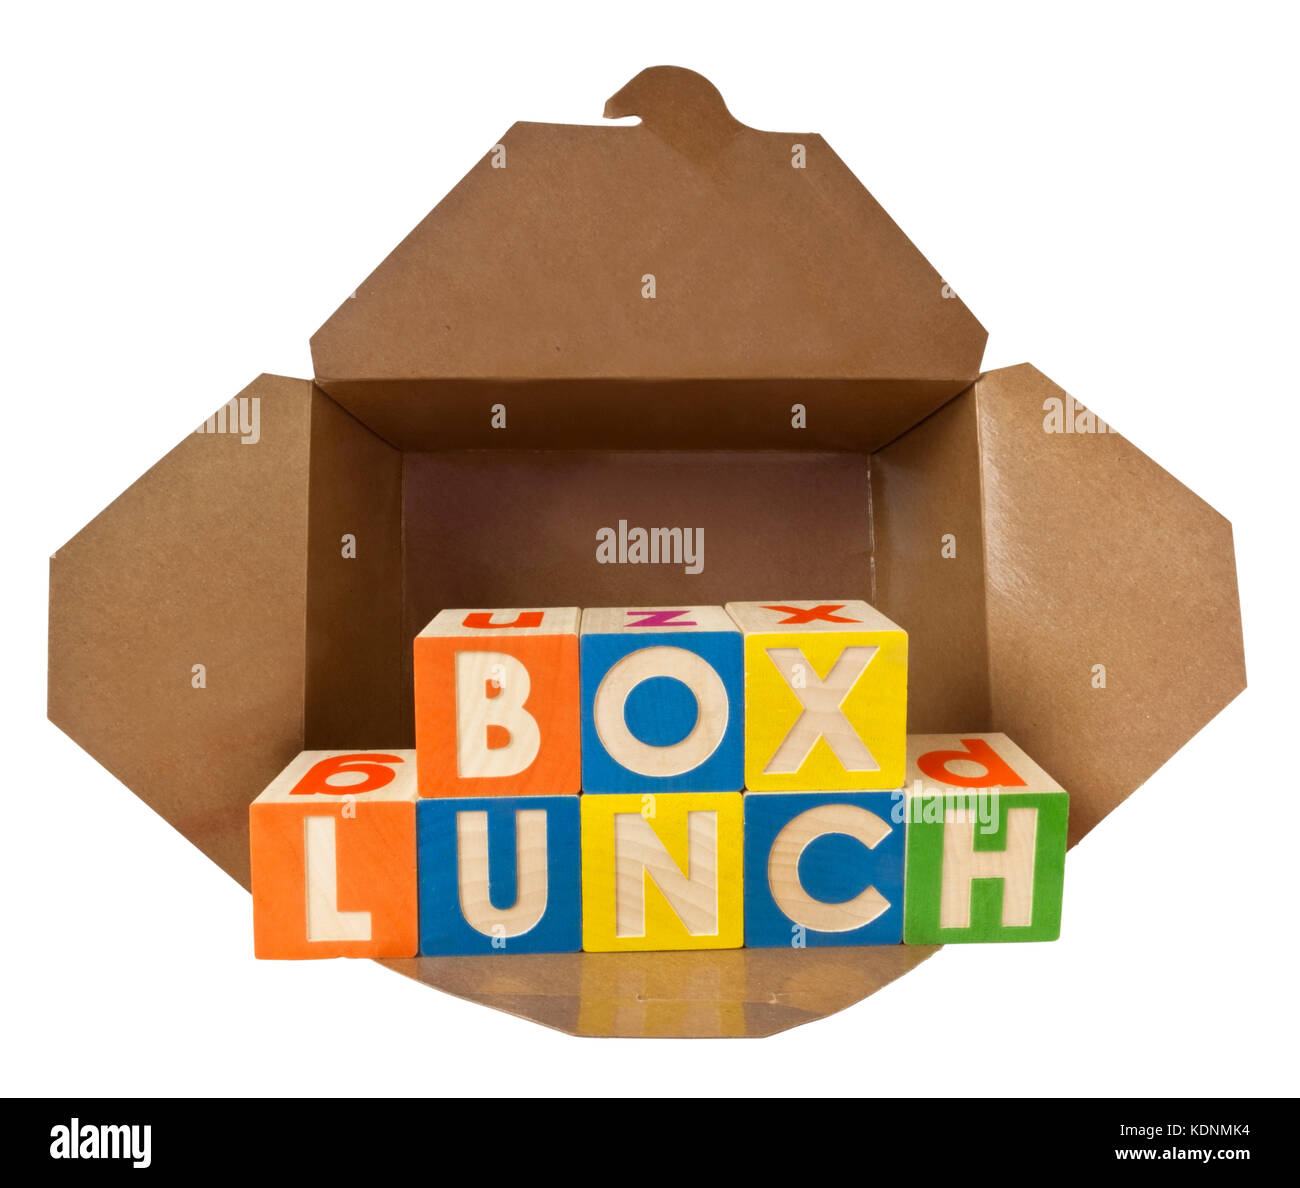 Take-out Box Lunch mit Lunchpaket Bausteine. isoliert. Stockfoto